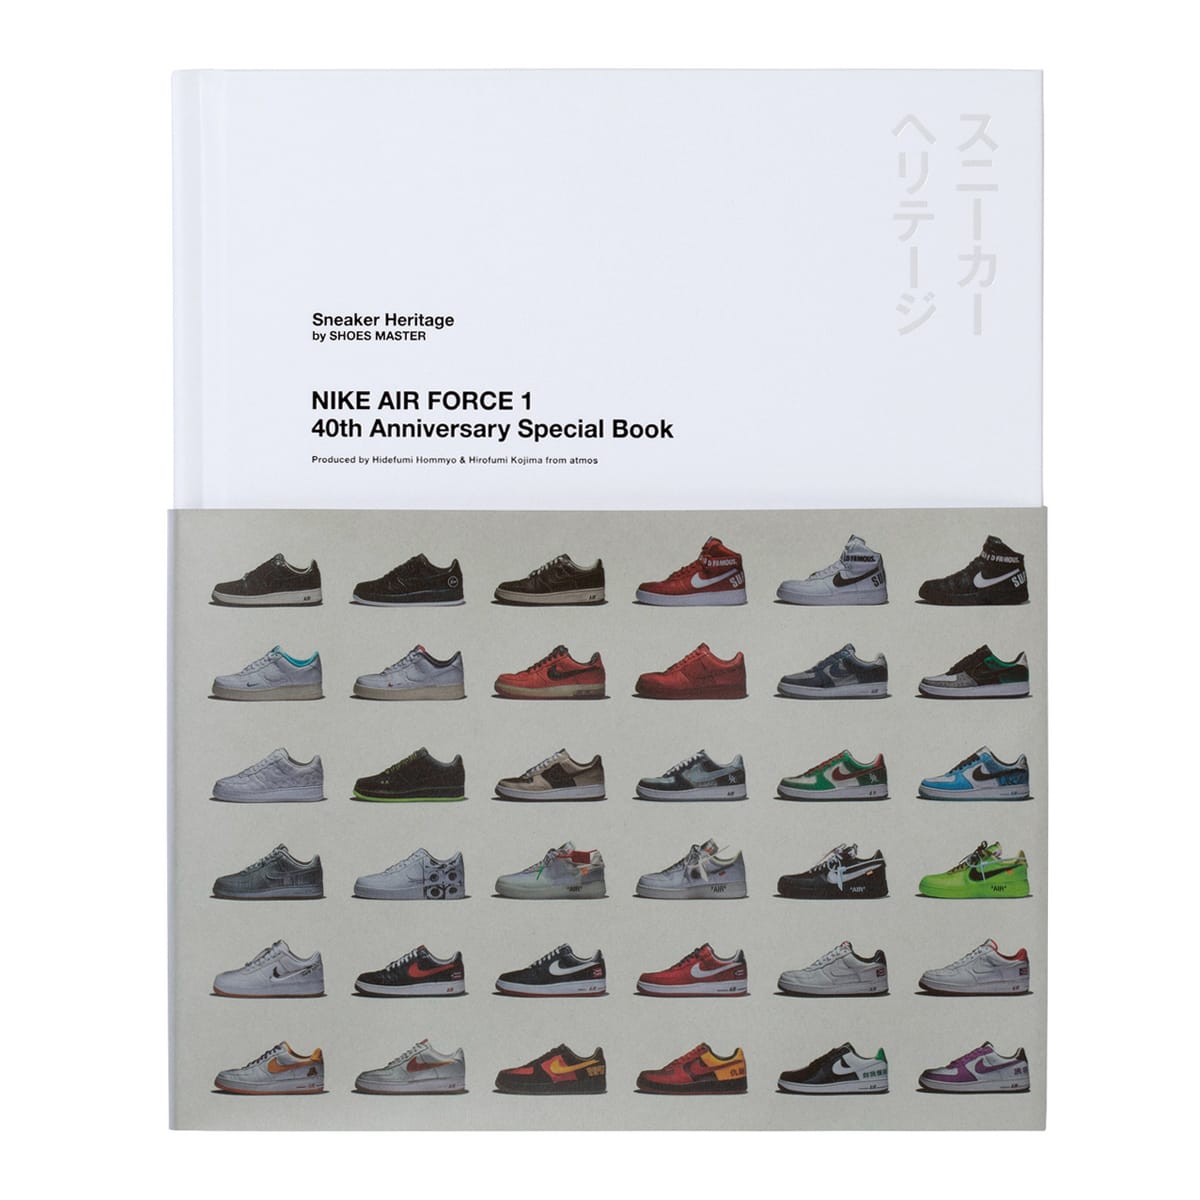 Nike Air Force 1 40th Anniversary Special Book